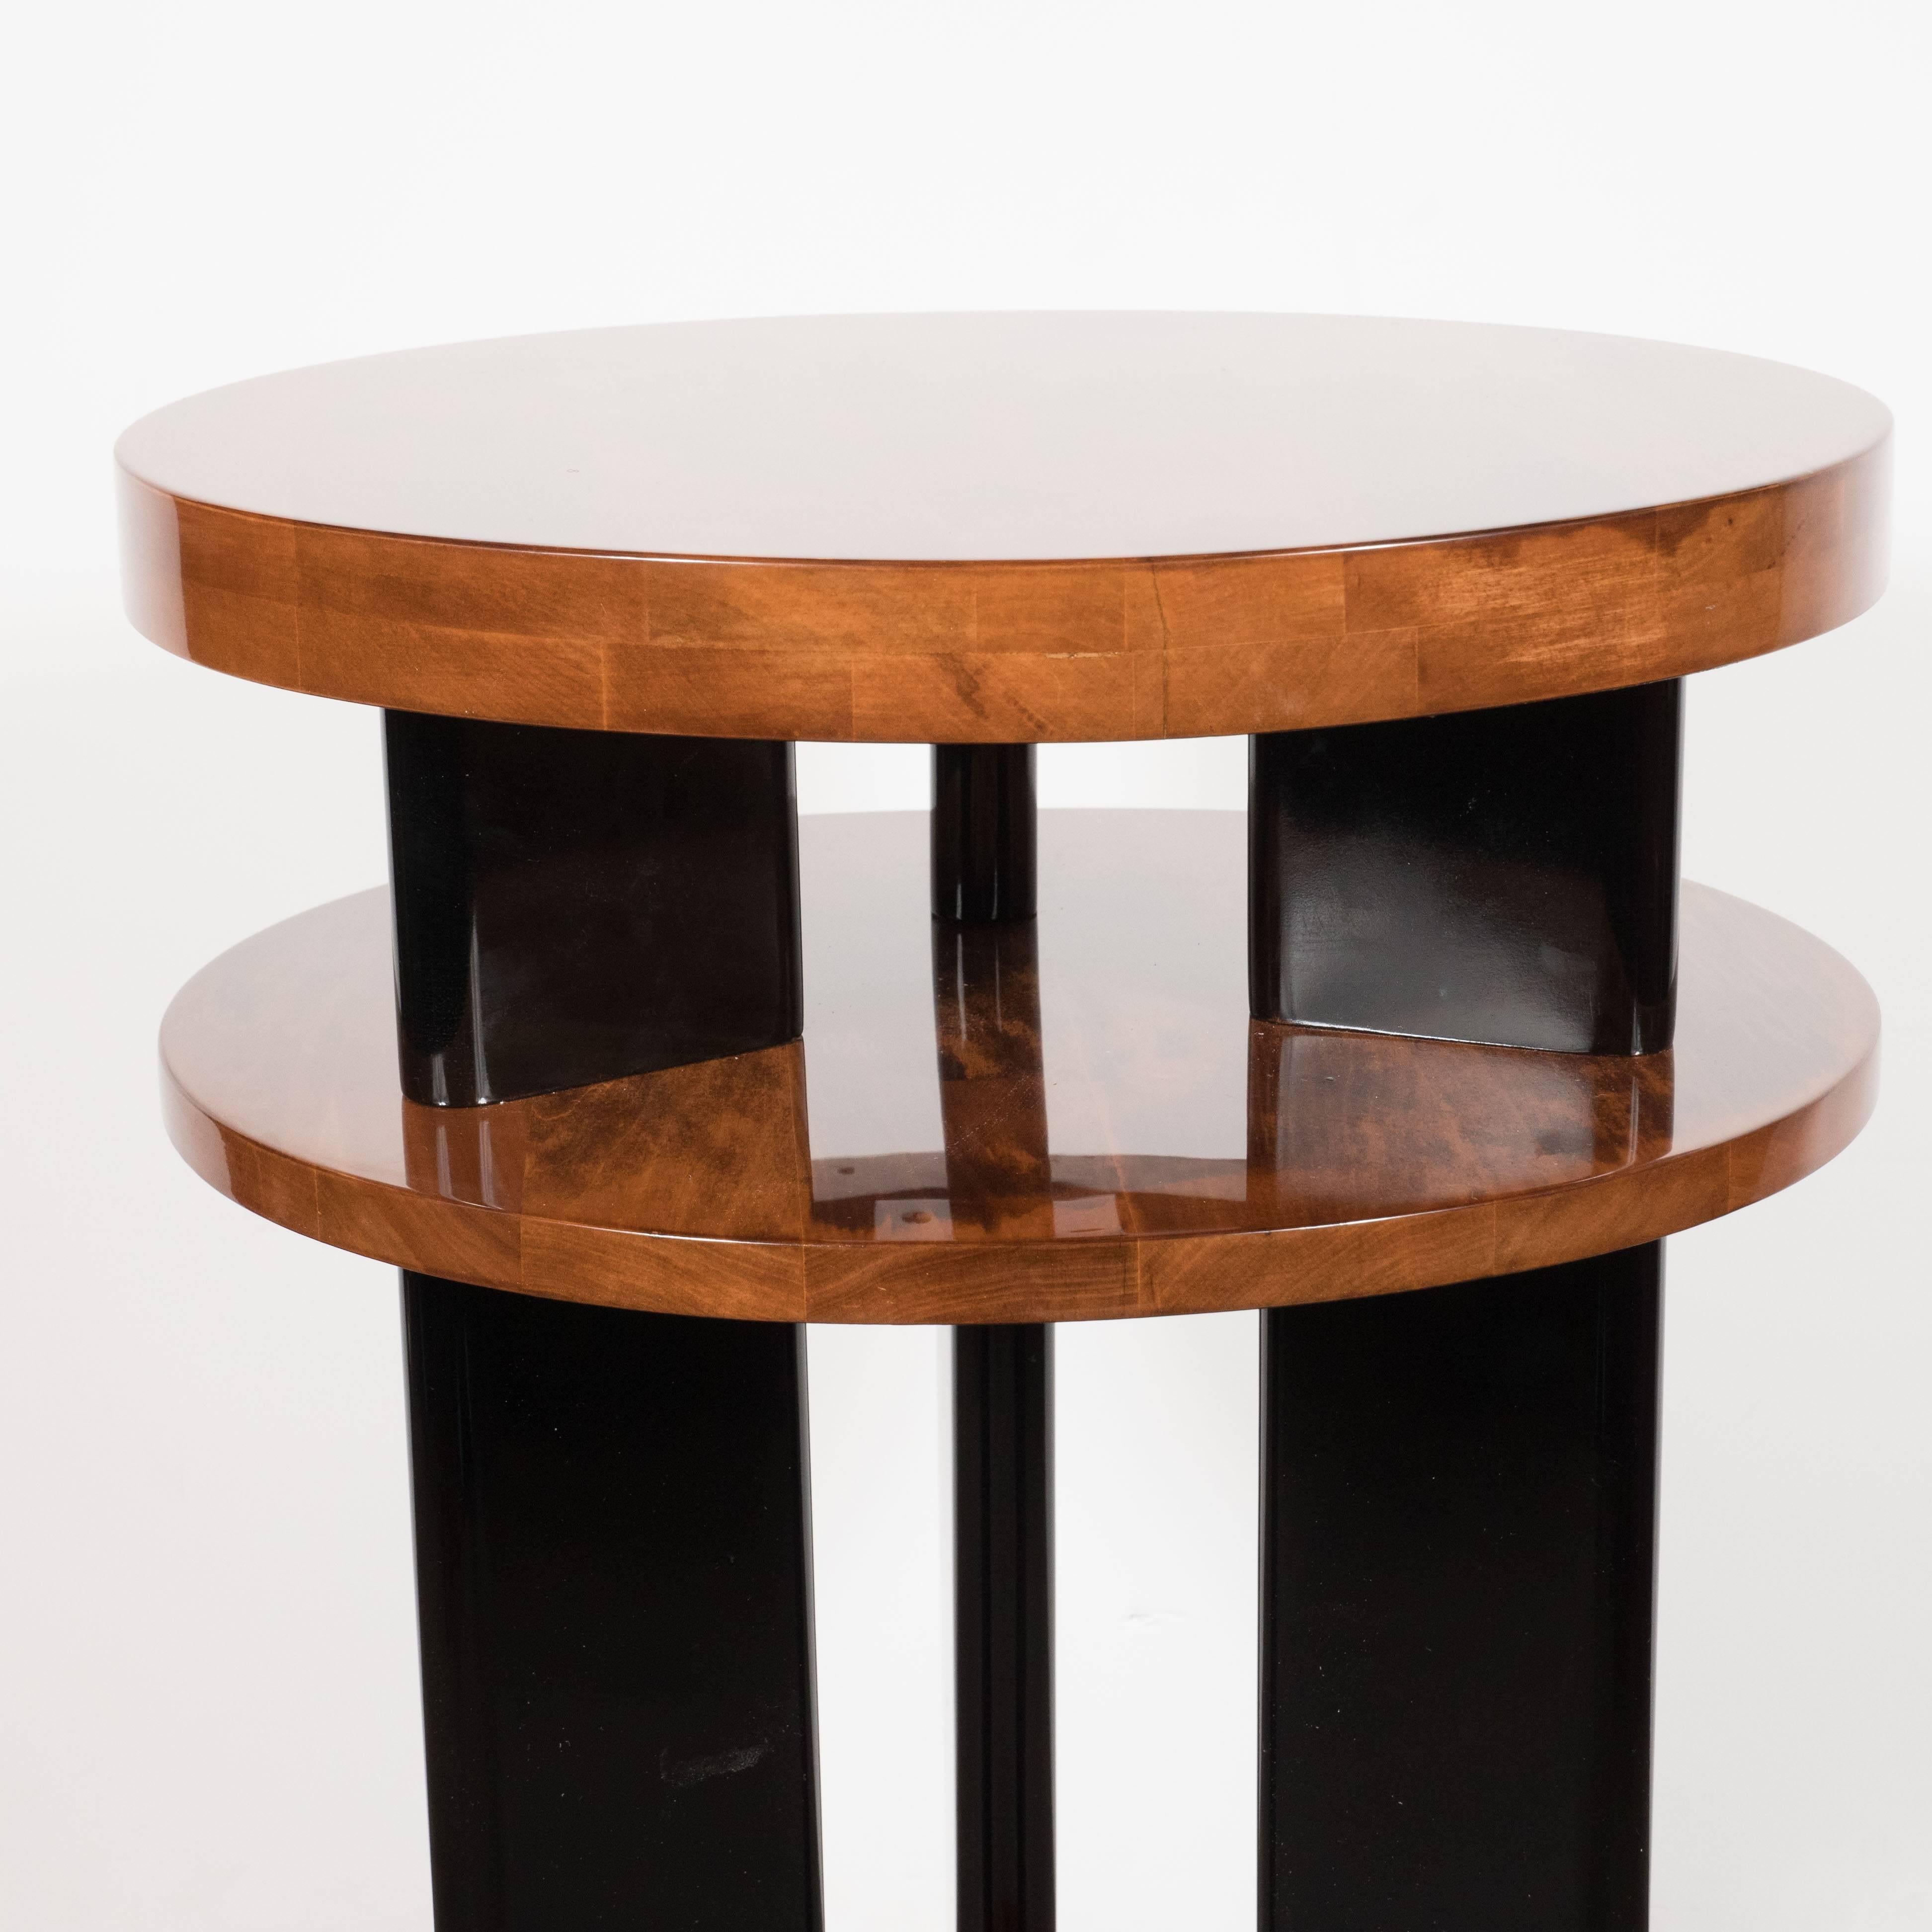 This Art Deco Machine-Age Gueridon table features three tiers of bookmatched walnut supported black lacquer legs that extend to the floor. An embodiment of Art Deco Elegance, this occasional table would be equally well suited next to a chair or a